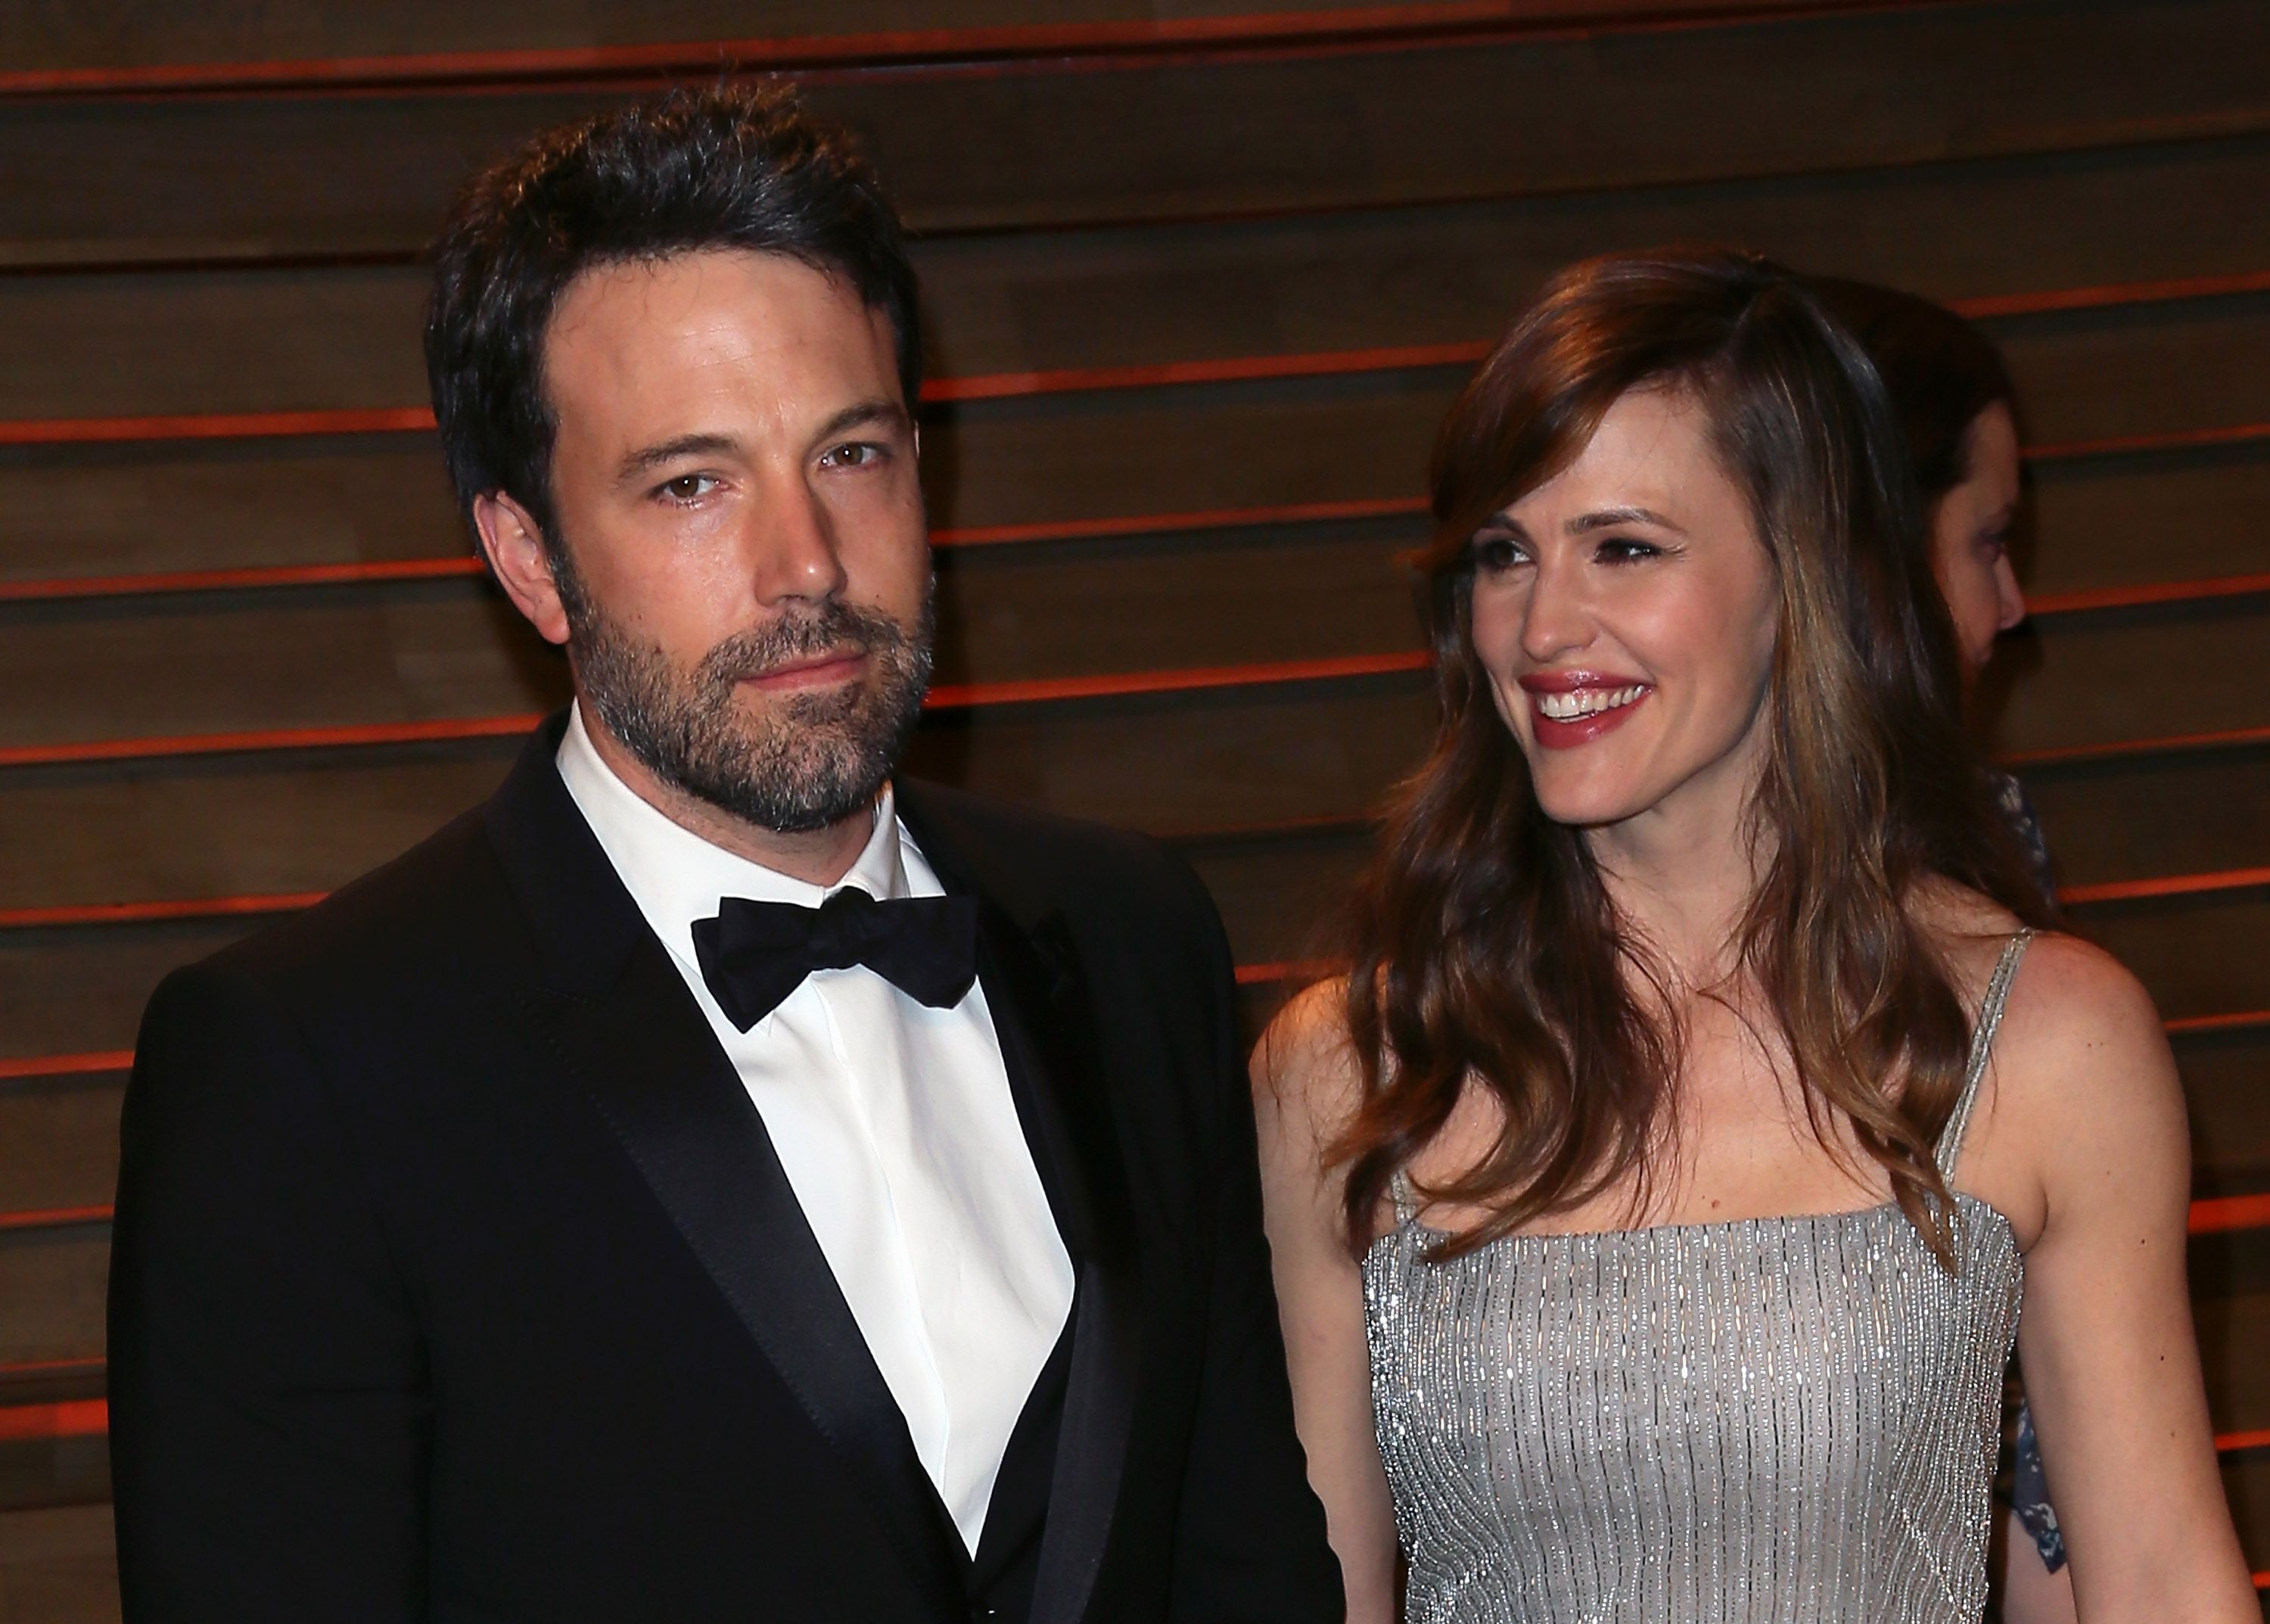 Ben Affleck and Jennifer Garner attend the 2014 Vanity Fair Oscar Party hosted by Graydon Carter on March 2, 2014 | Source: Getty Images